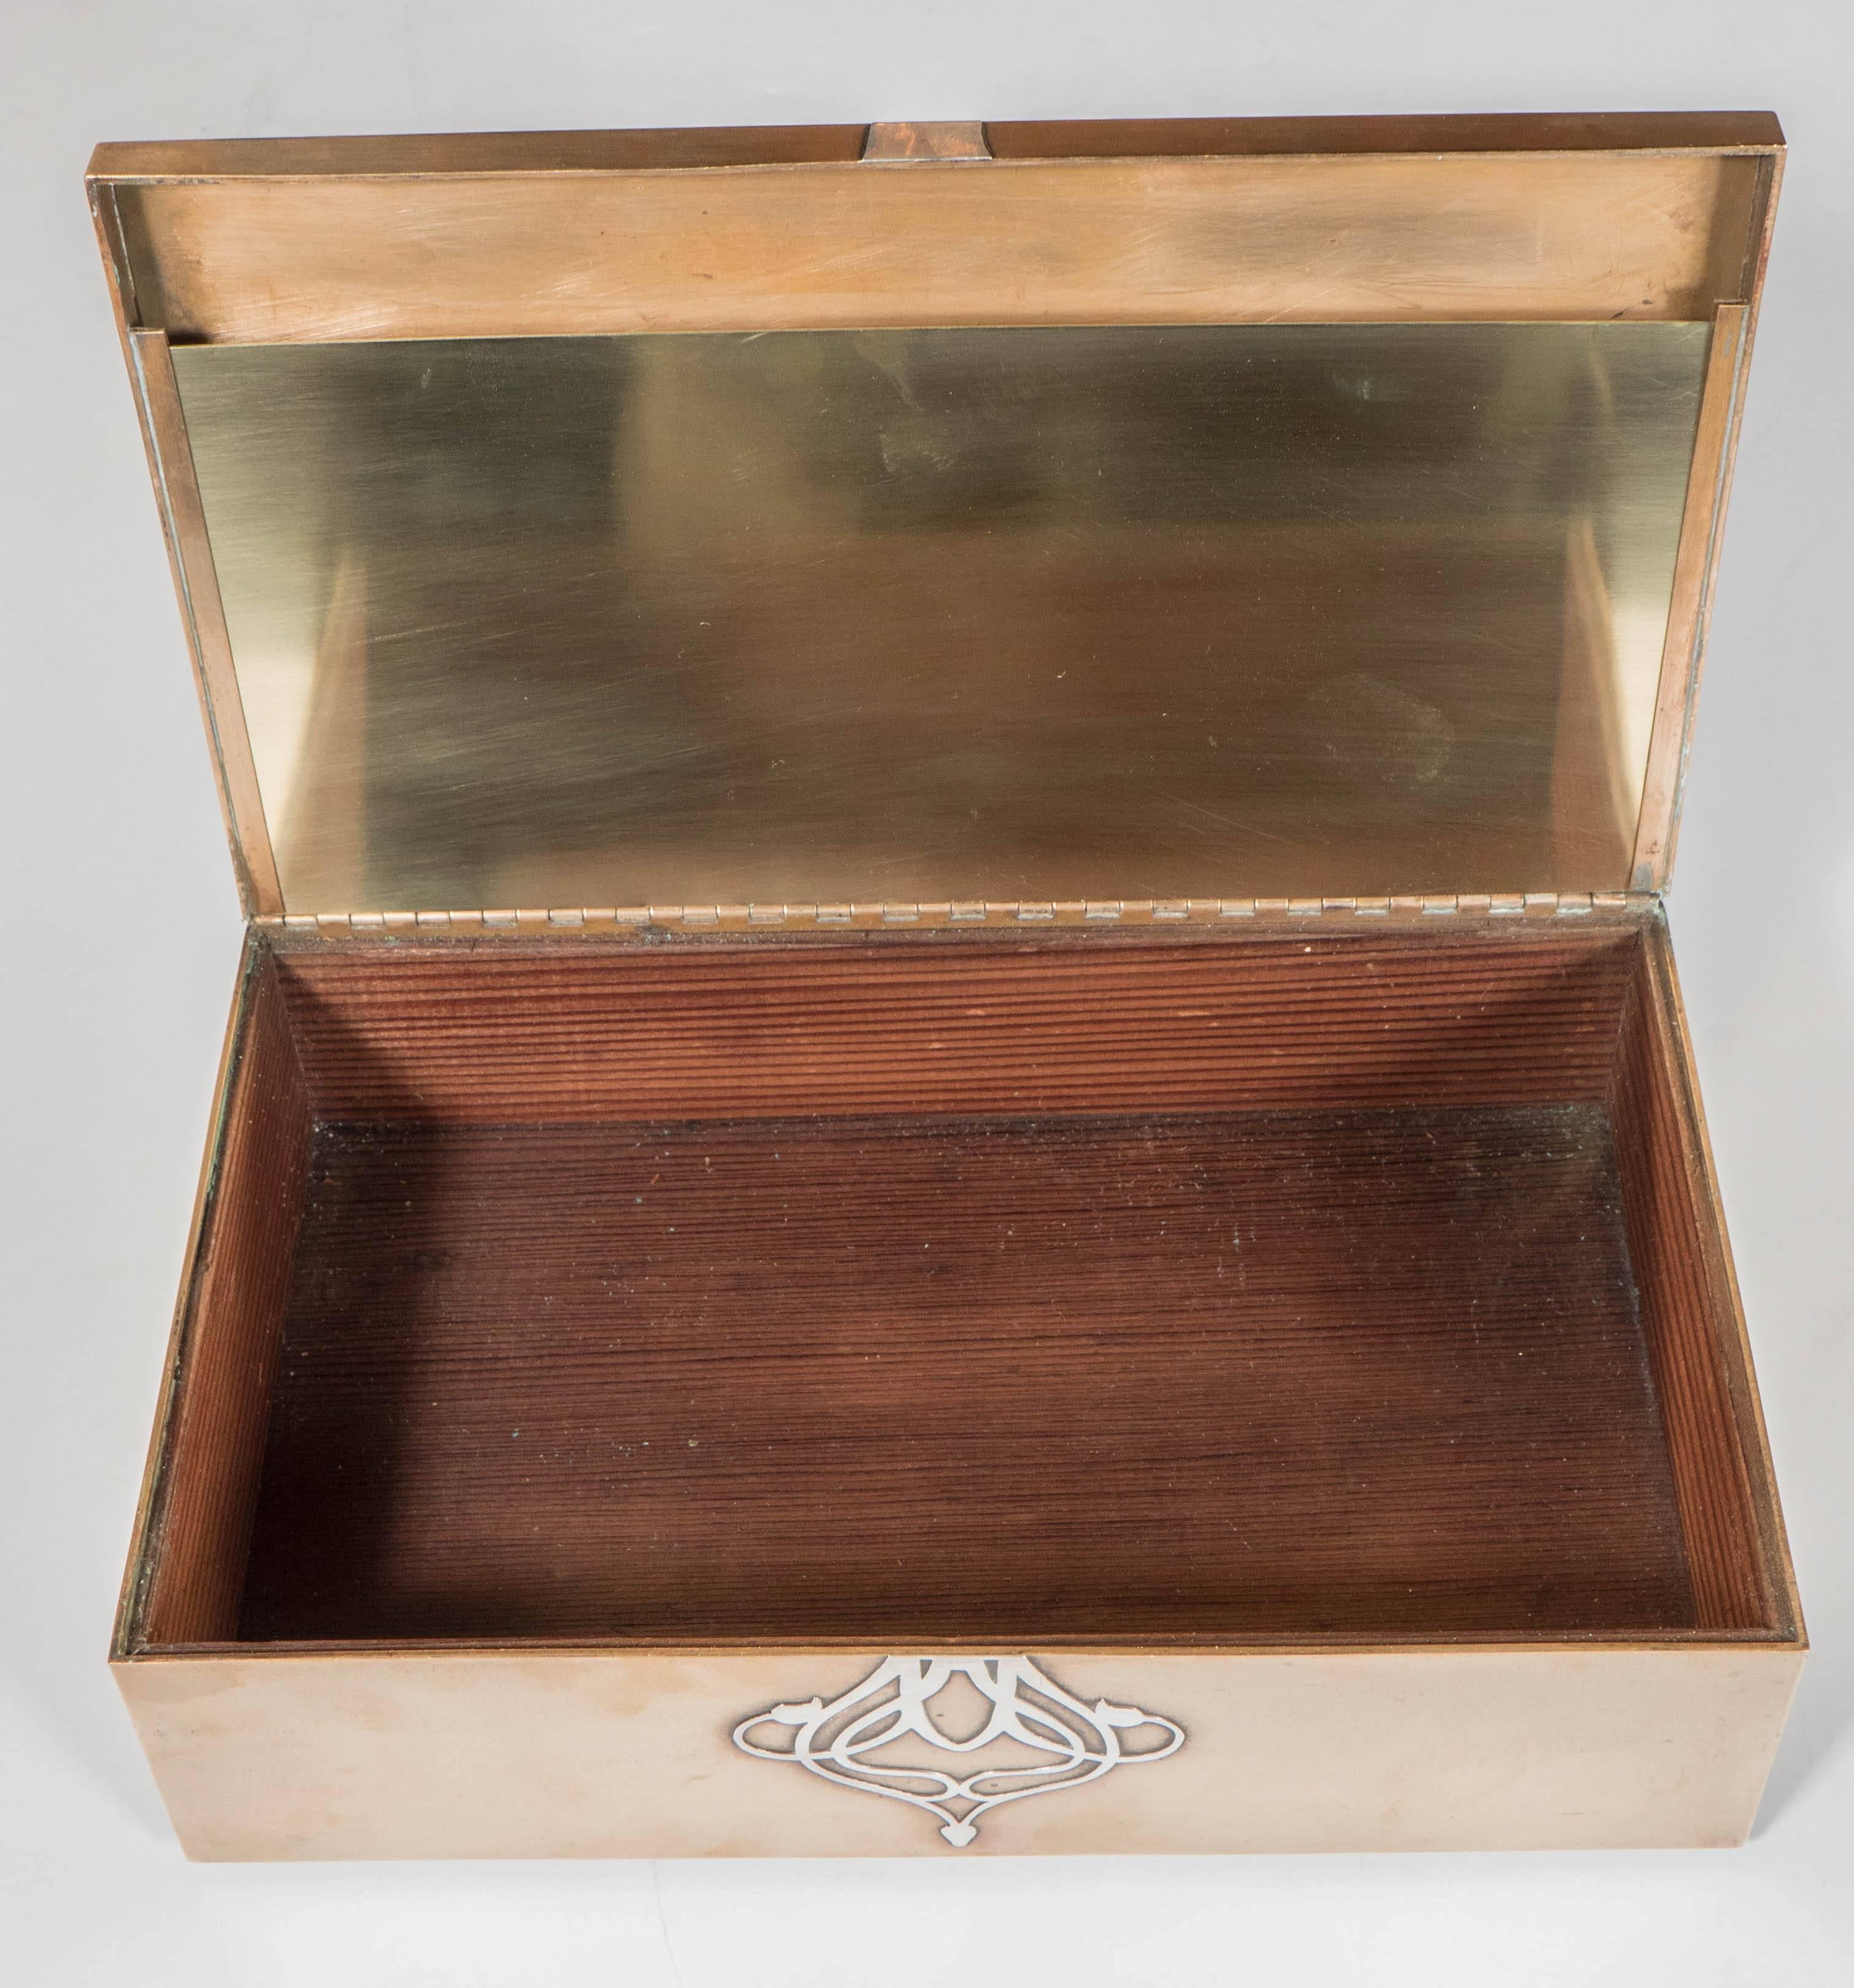 Early 20th Century Gorgeous Aesthetic Movement Bronze Box with Sterling Silver Overlay by Heintz